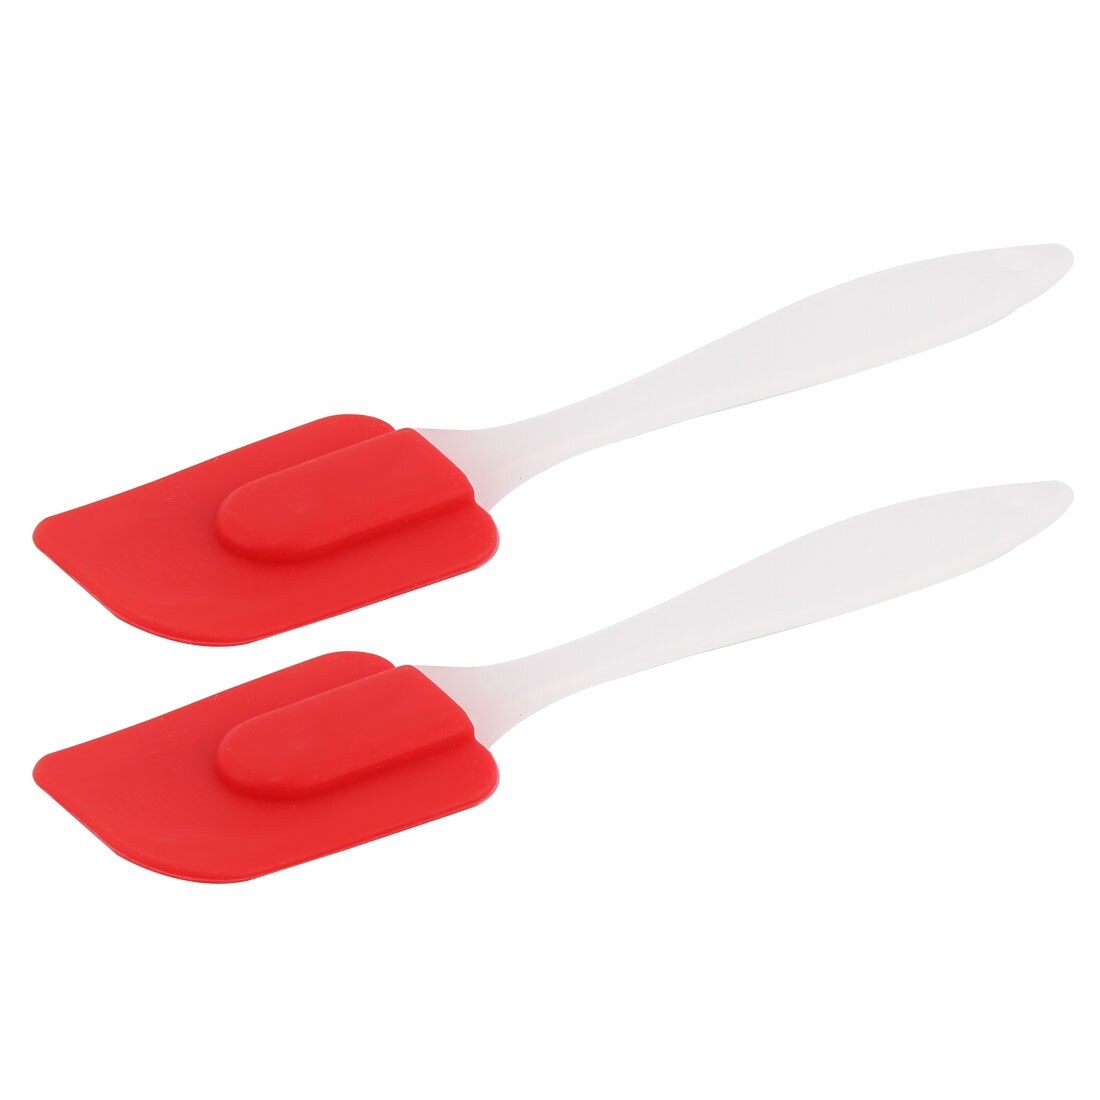 https://ak1.ostkcdn.com/images/products/is/images/direct/bbbef8828eb710e50f586f13bd180f9def7c78bf/Kitchen-Silicone-Head-Plastic-Handle-Nonstick-Spatula-Scraper-Red-2PCS.jpg